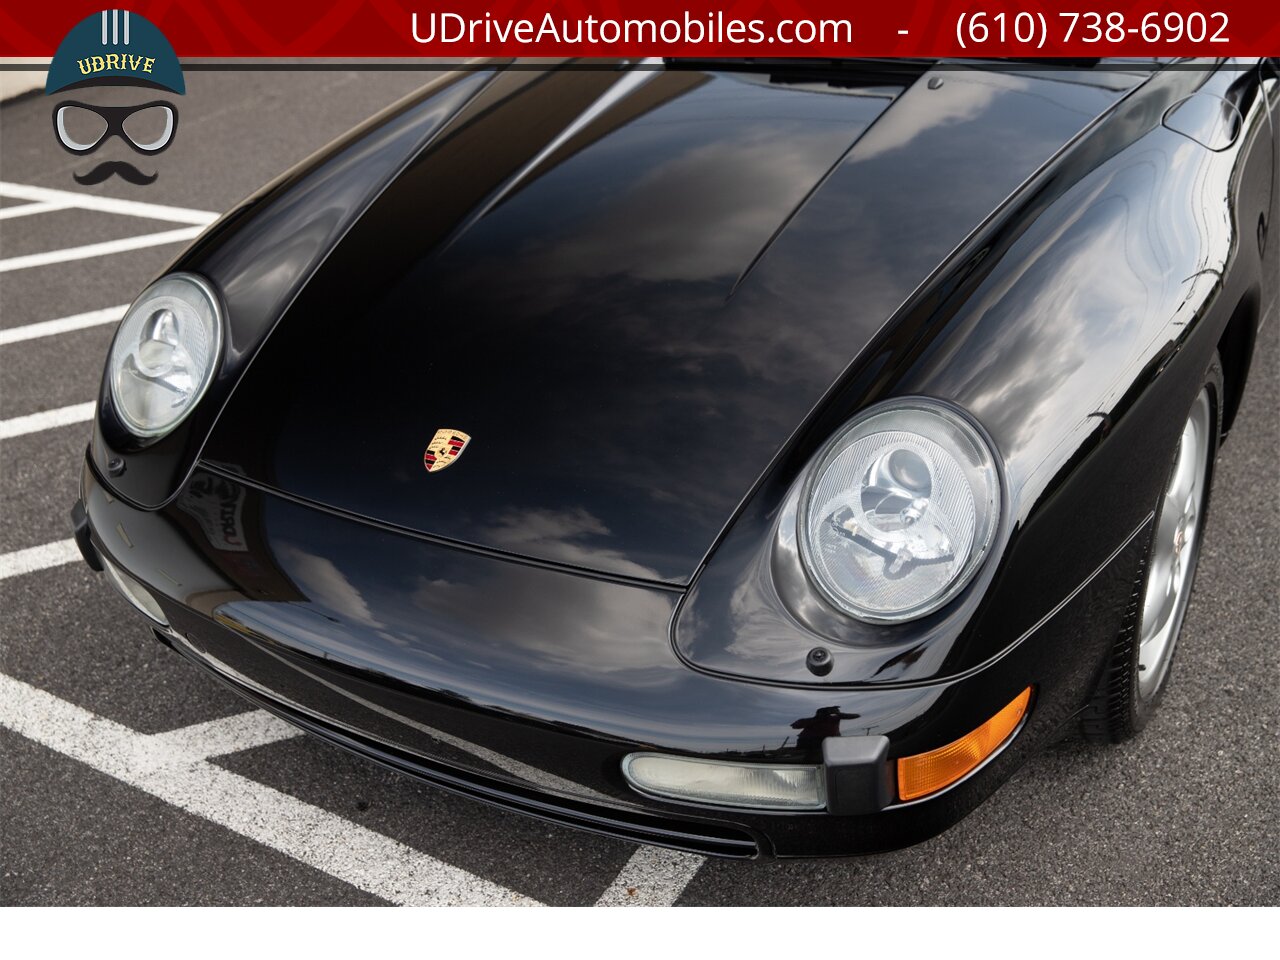 1995 Porsche 911 993 Carrera 6 Speed 16k Miles Service History  Black over Black Spectacular Stock Example 1 Owner Clean Carfax - Photo 9 - West Chester, PA 19382